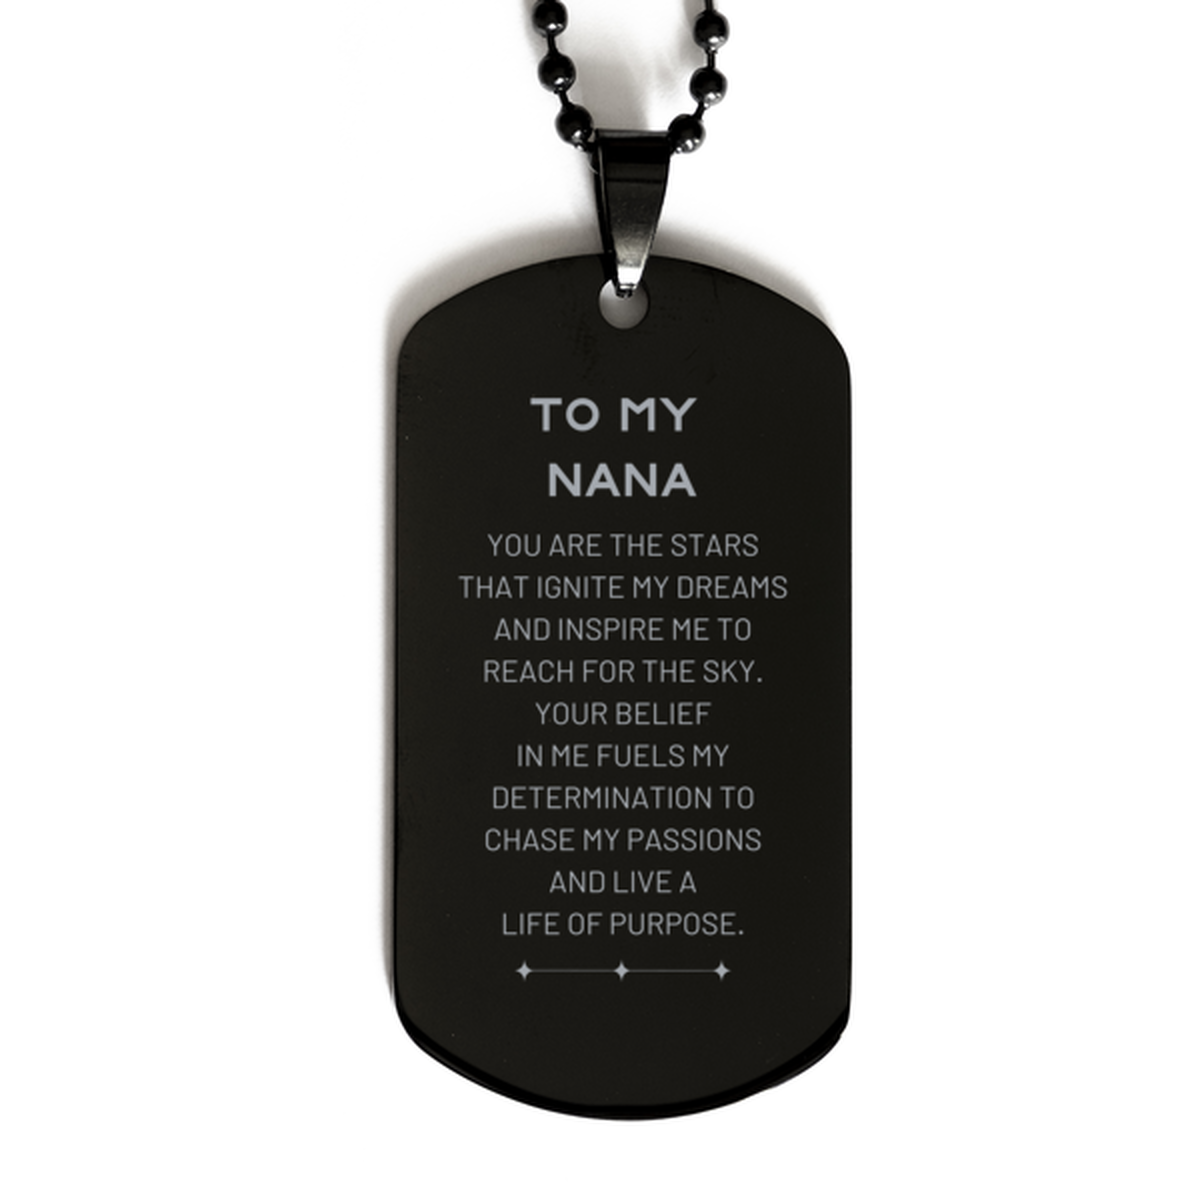 To My Nana Black Dog Tag, You are the stars that ignite my dreams and inspire me to reach for the sky, Birthday Unique Gifts For Nana, Thank You Gifts For Nana